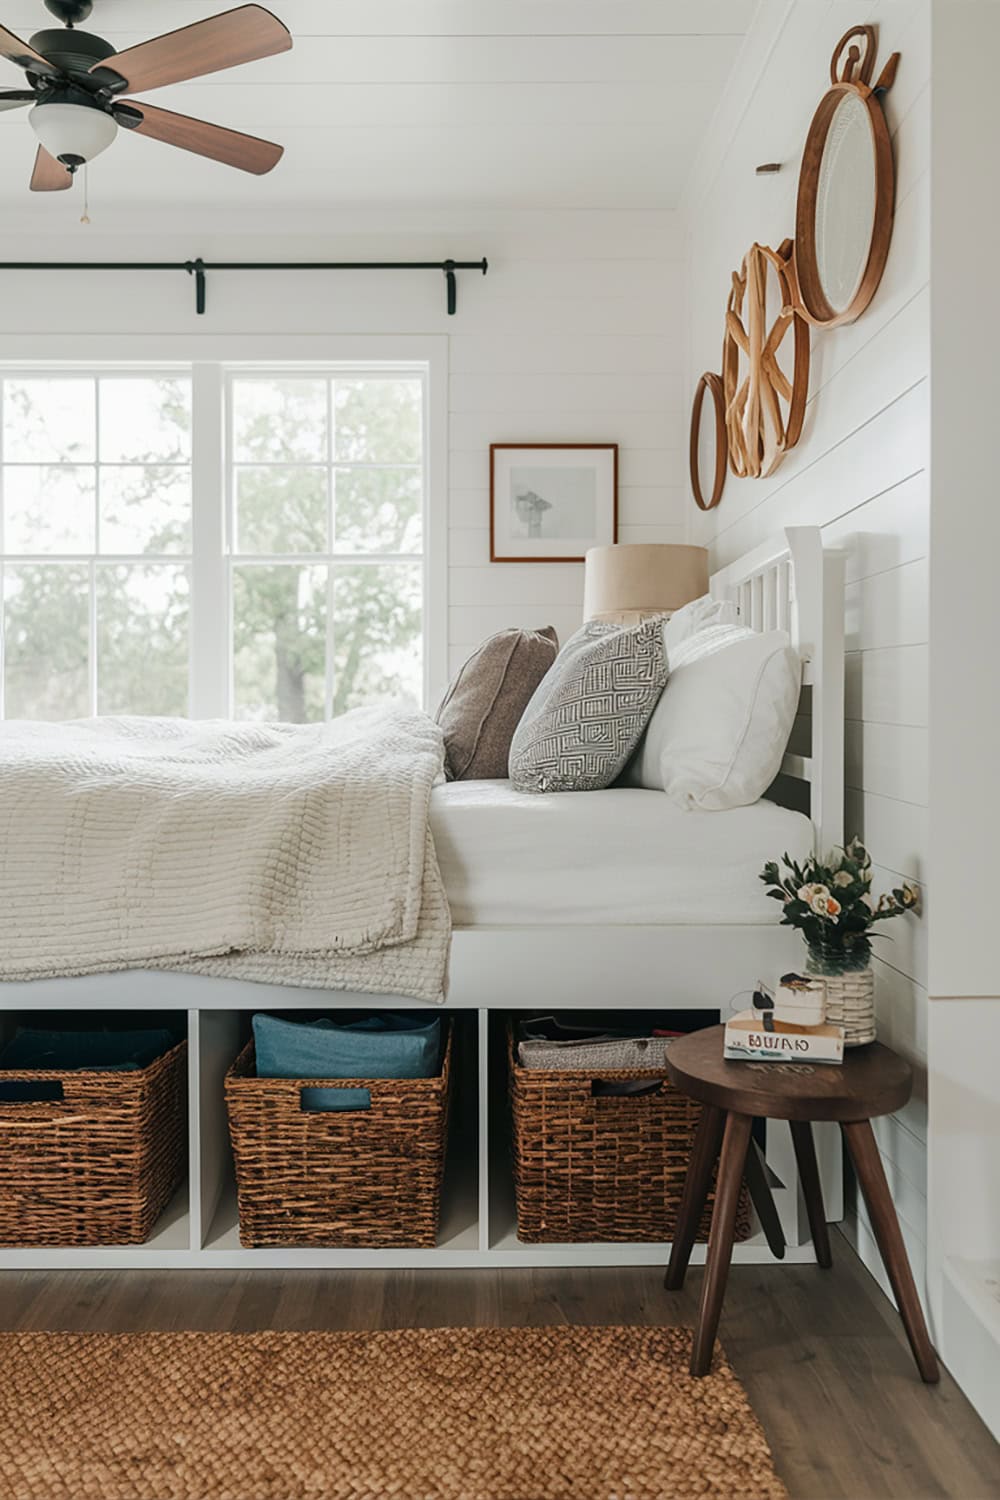 Under Bed Storage with Baskets and Containers